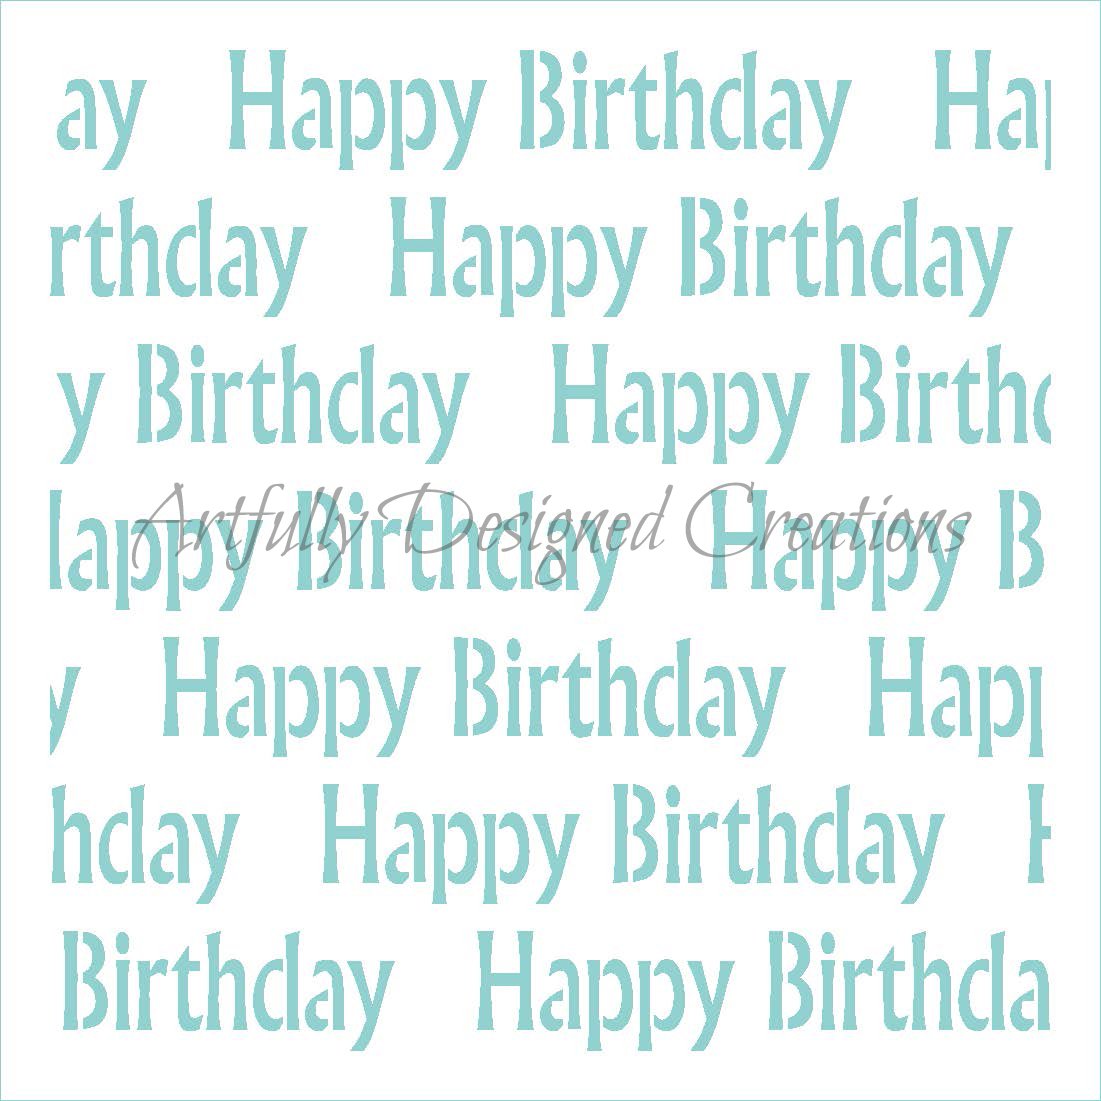 Happy Birthday Background Stencil Background  Bee's Baked Art Supplies and  Artfully Designed Creations